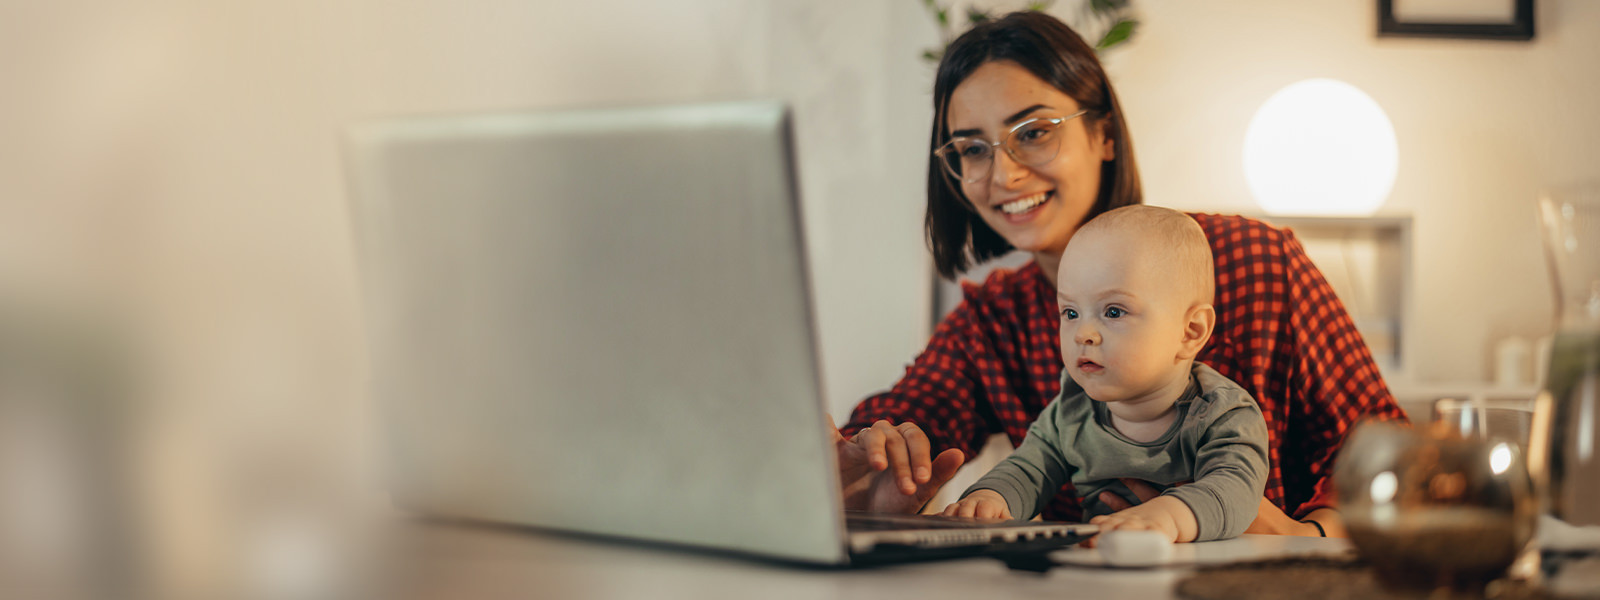 a smiling woman and a baby looking at a laptop screen